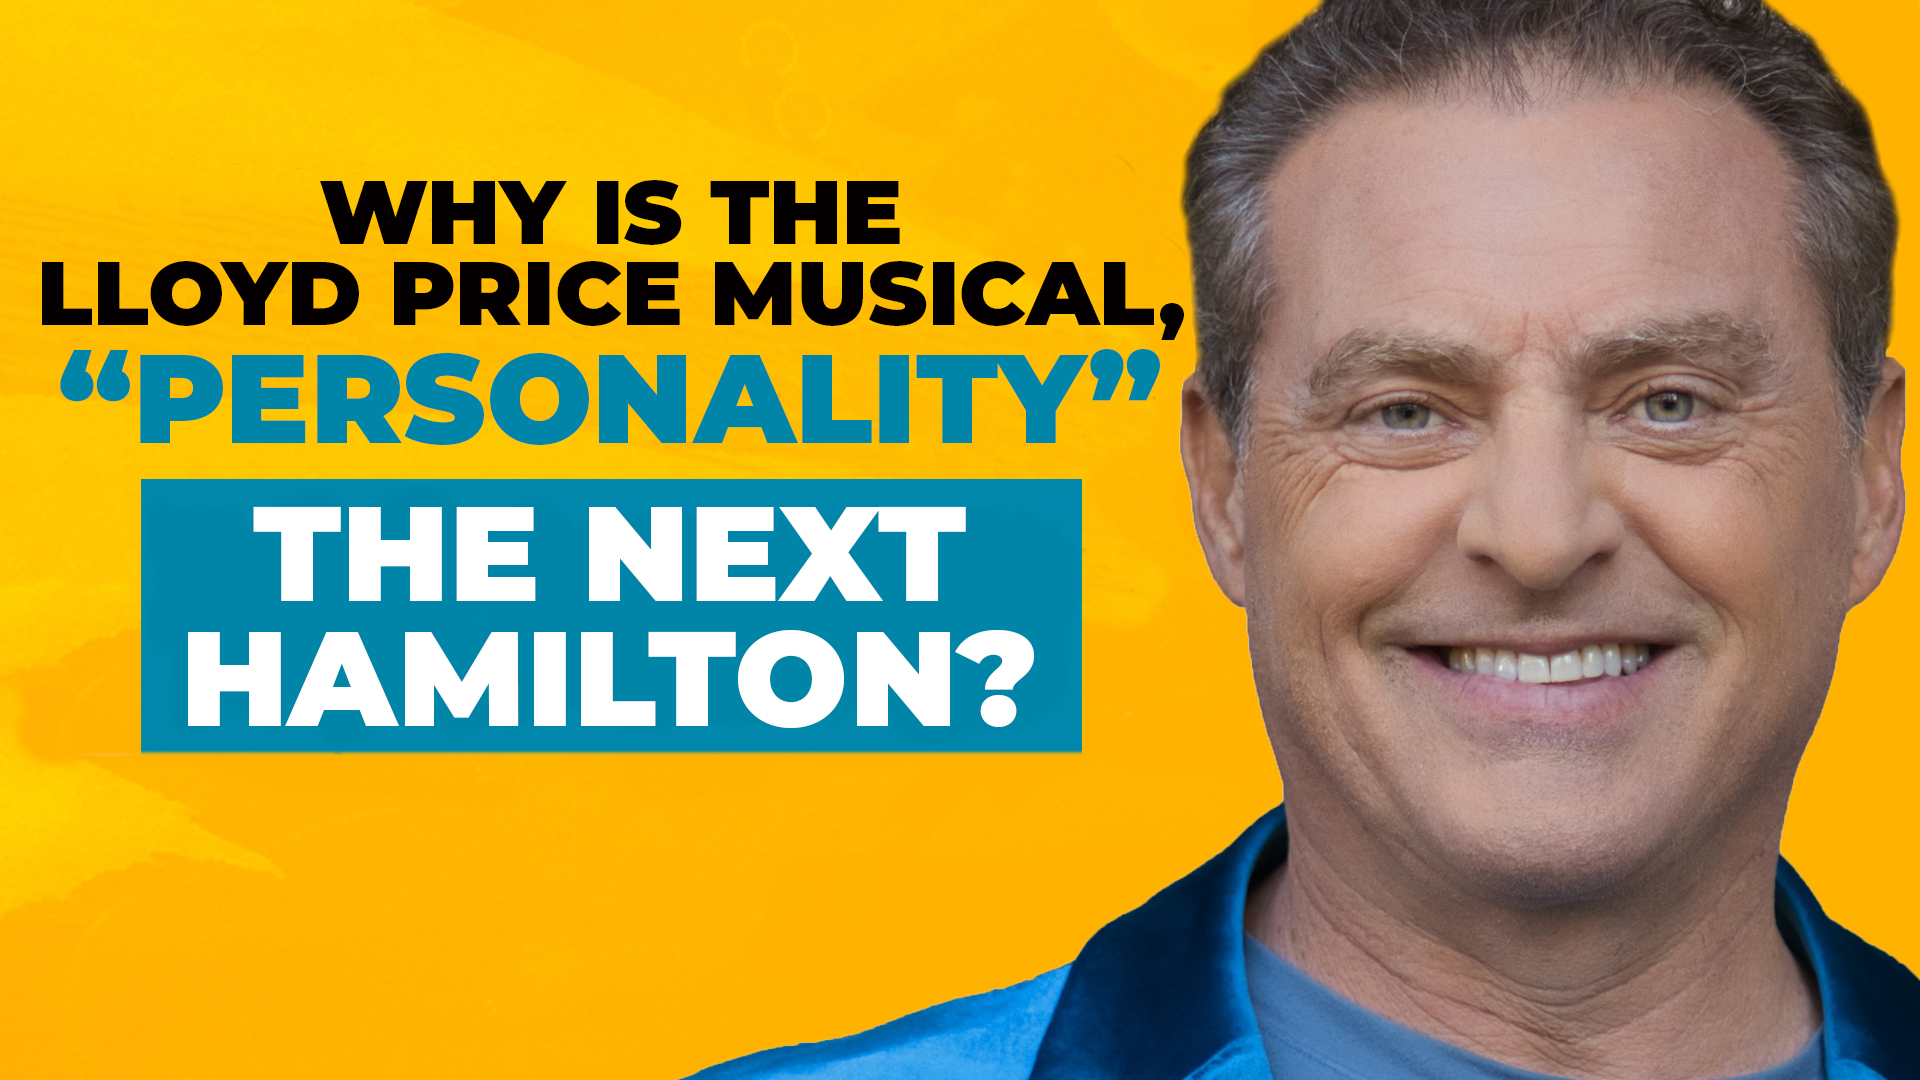 A headshot of Mike Koenigs on a bold yellow background, along with text reading "Why is the Lloyd Price Musical, 'Personality' The Next Hamilton?"